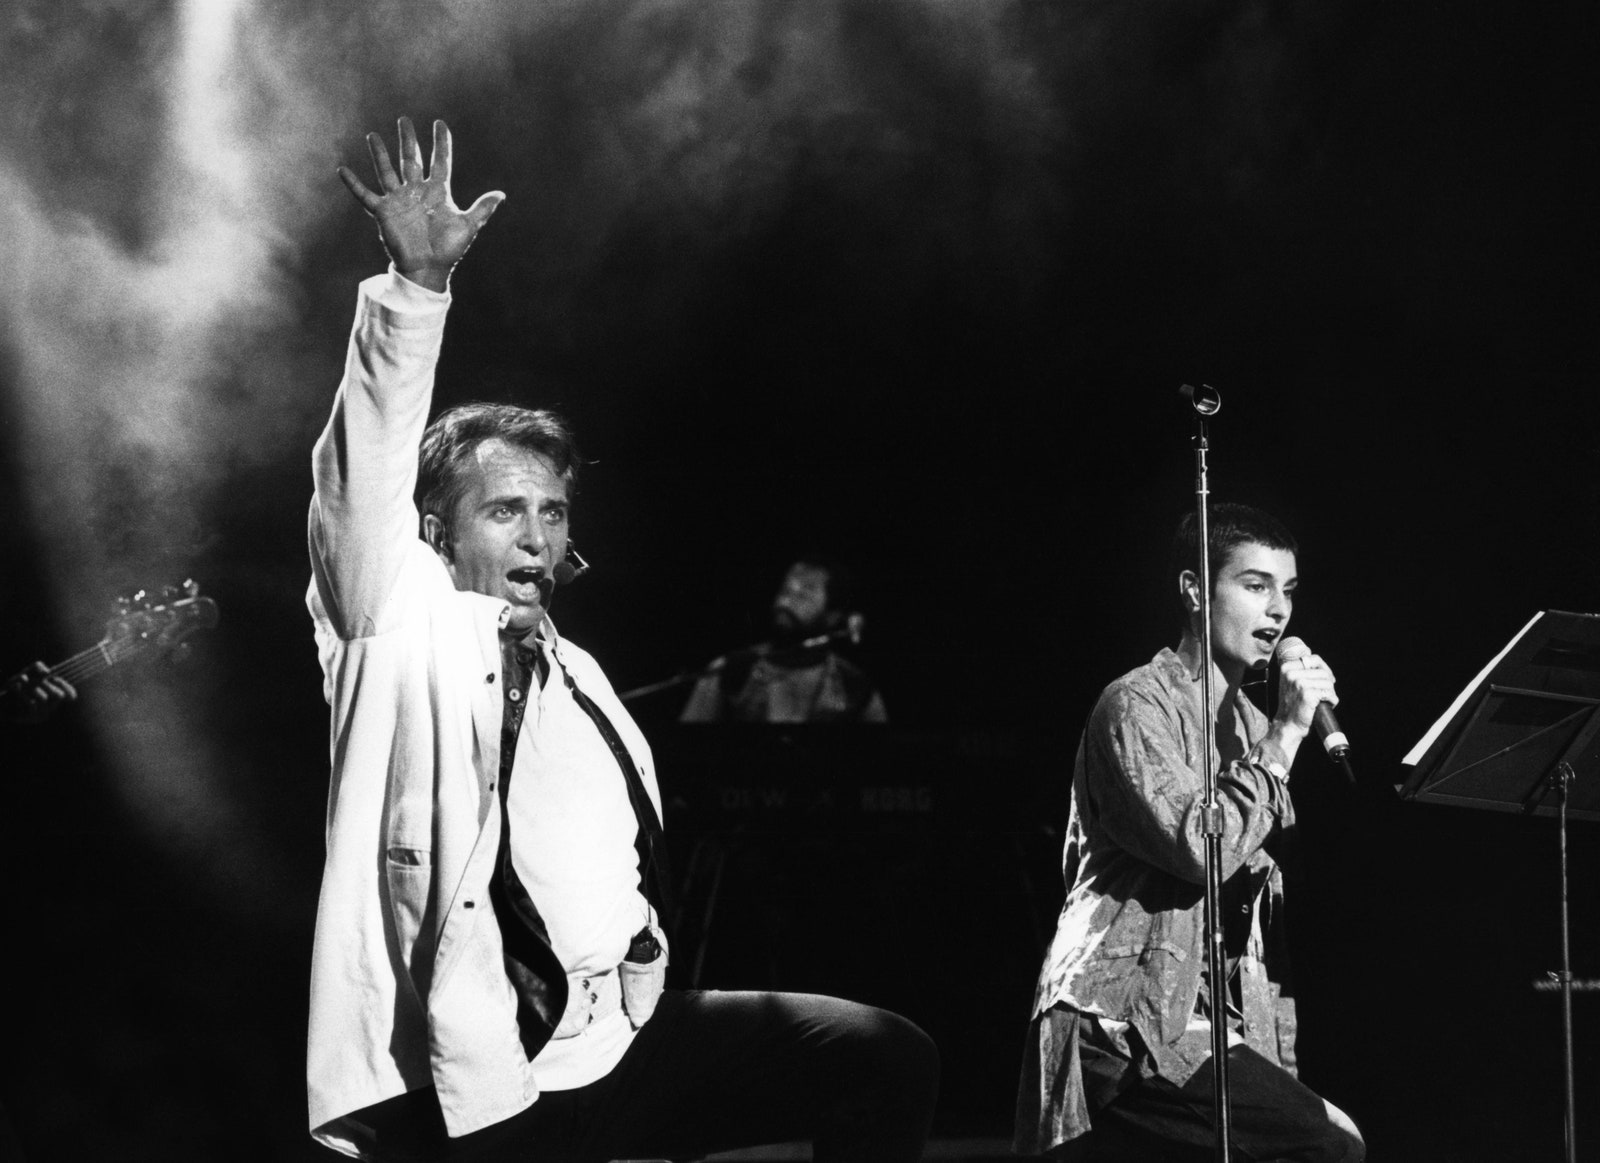 On stage with Peter Gabriel in 1993